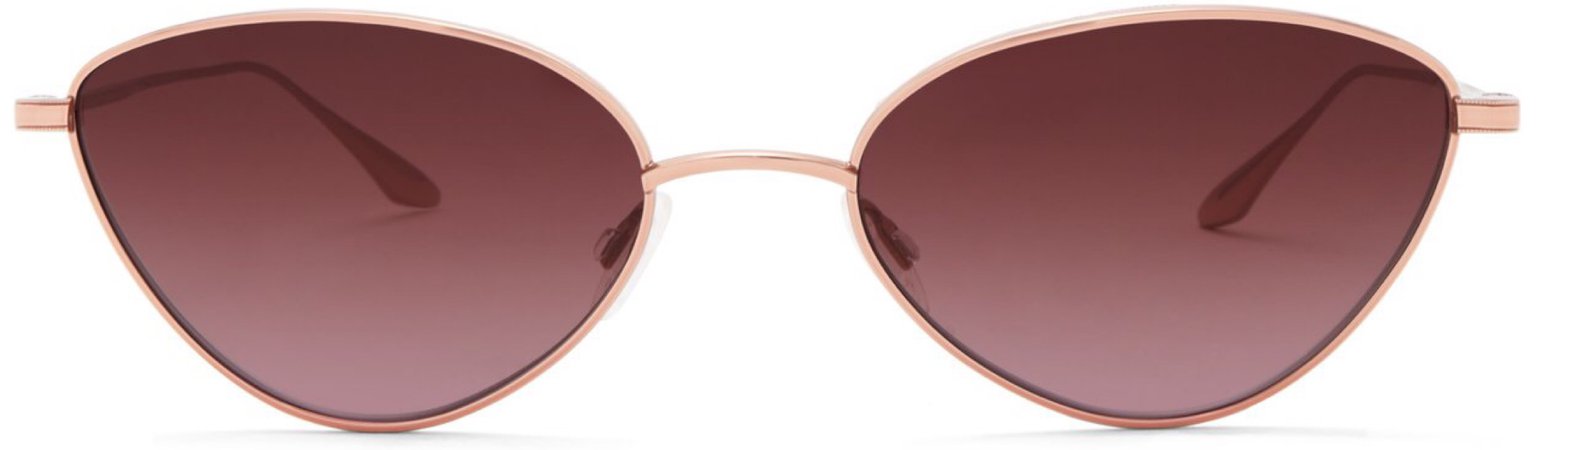 Rose gold sunglasses Barton and Perrier